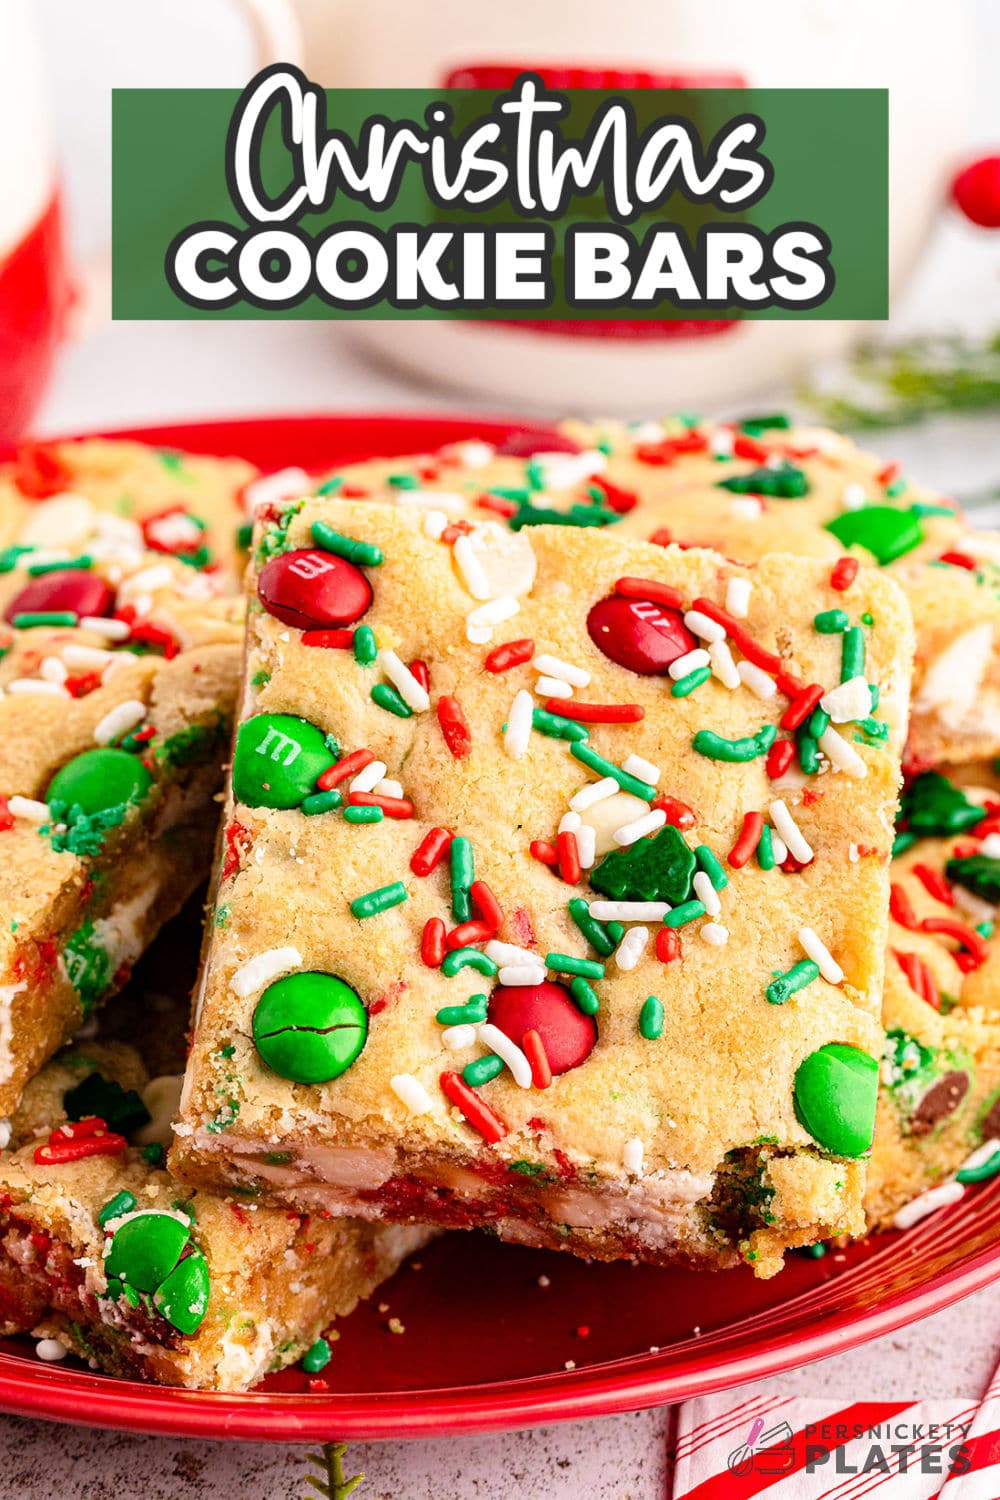 So much faster than drop cookies and just as festive, these tasty and decadent Christmas cookie bars have a chewy cookie base and are loaded with festive M&Ms and white chocolate chips. They are a must-make during the busy holiday season! | www.persnicketyplates.com